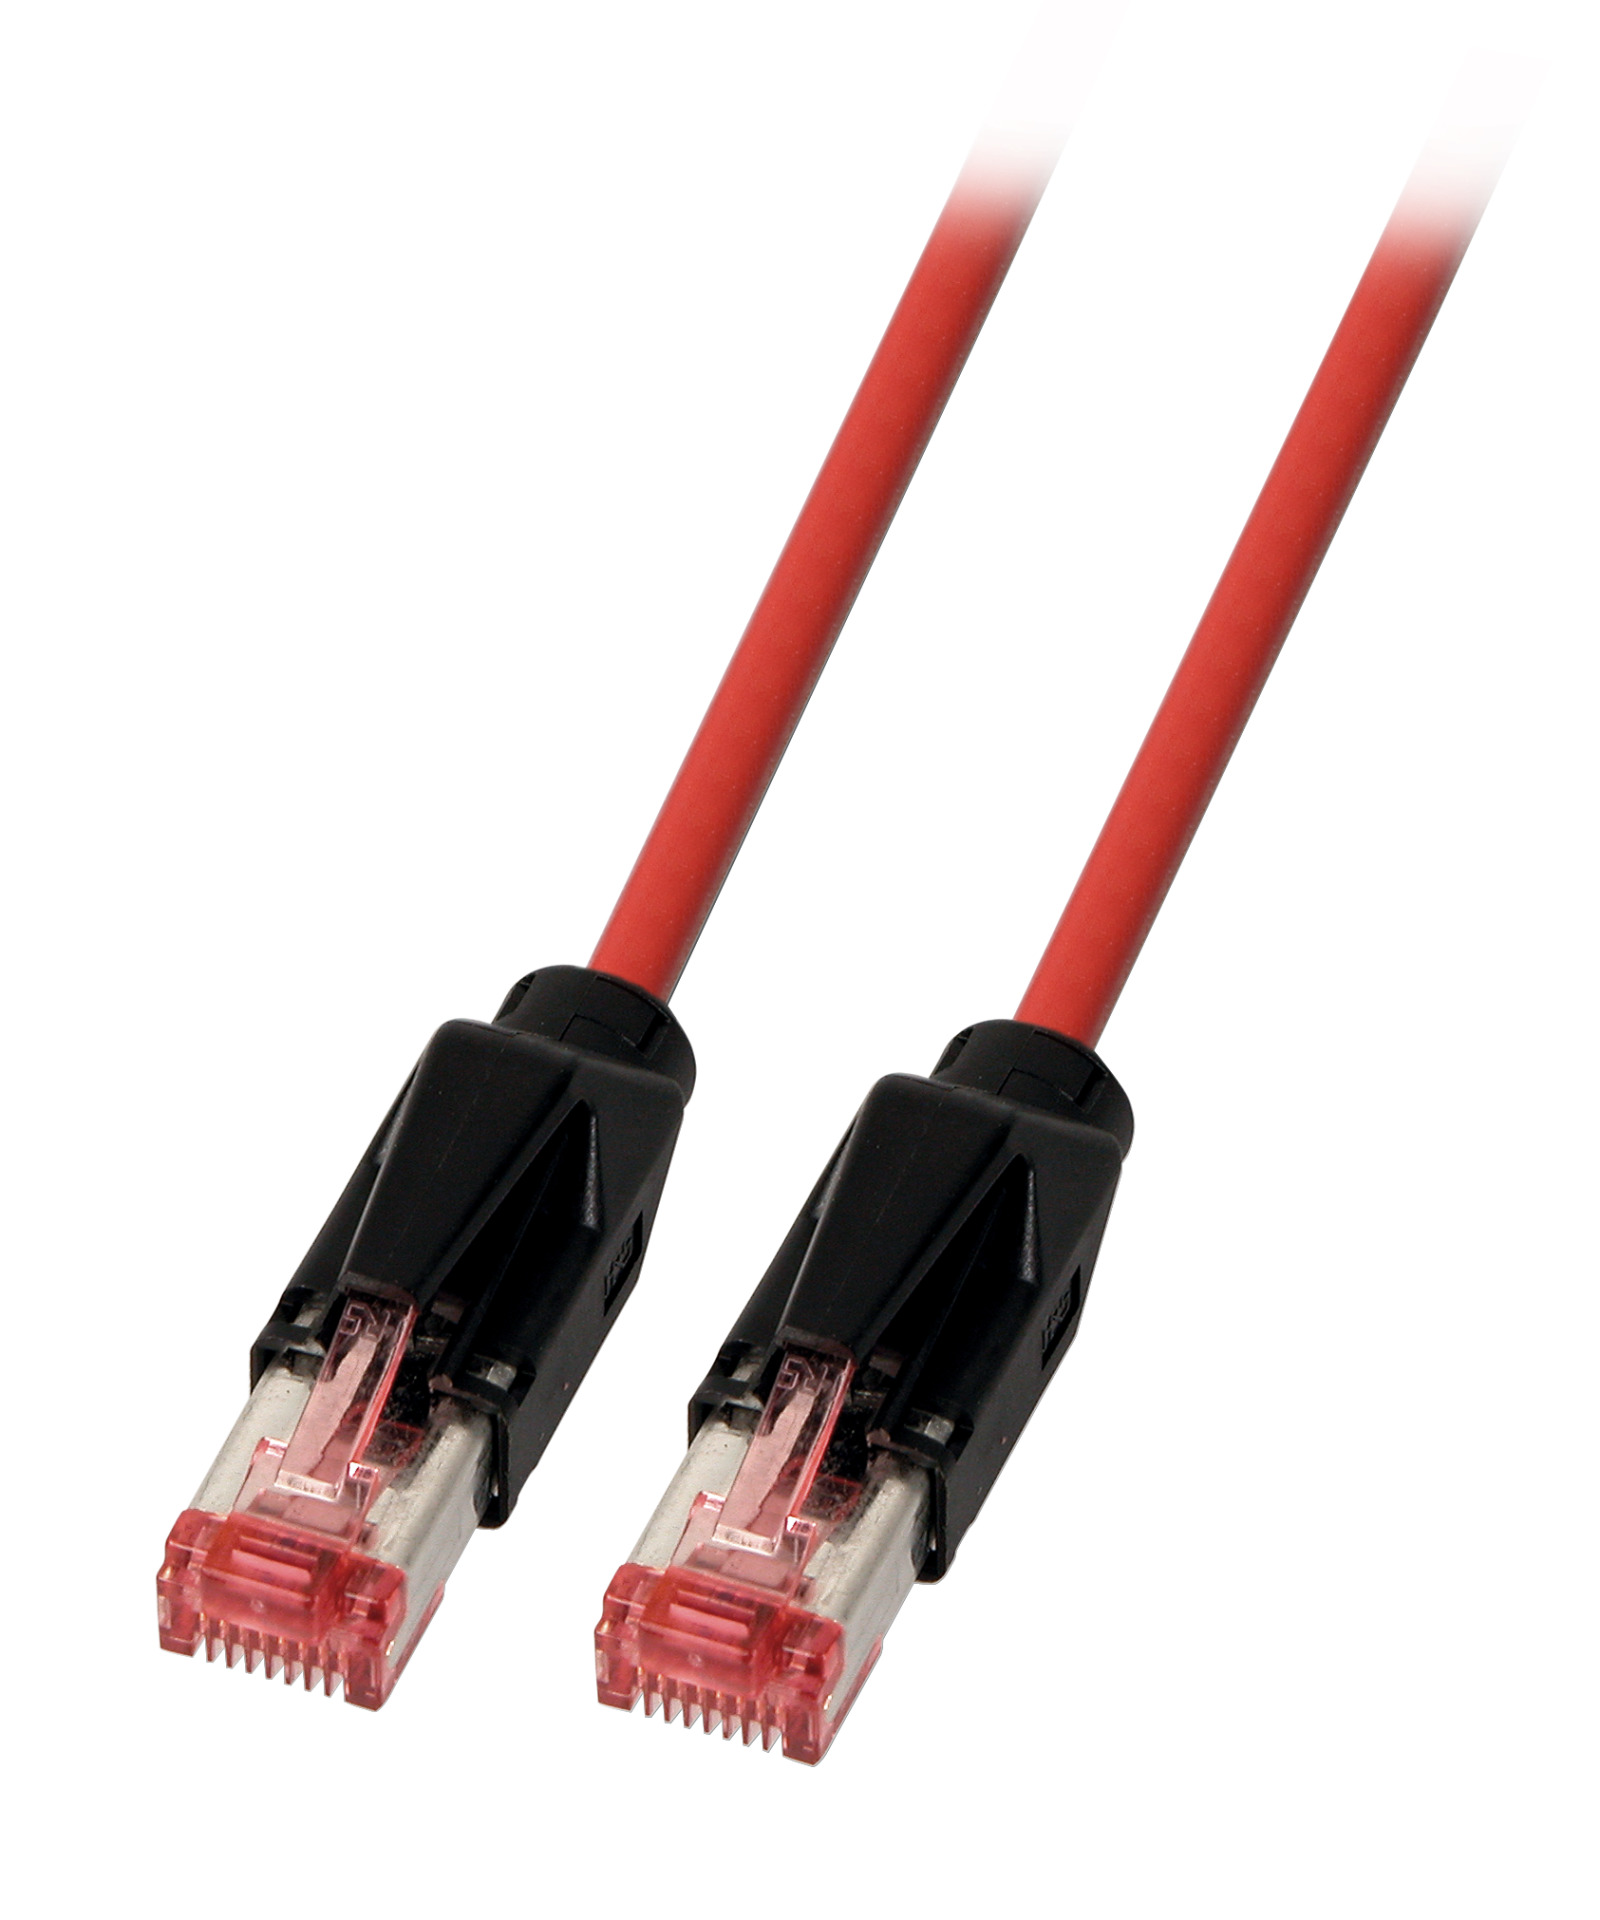 RJ45 Patch cable S/FTP, Cat.6A, TM21, UC900, PUR, 1m, red